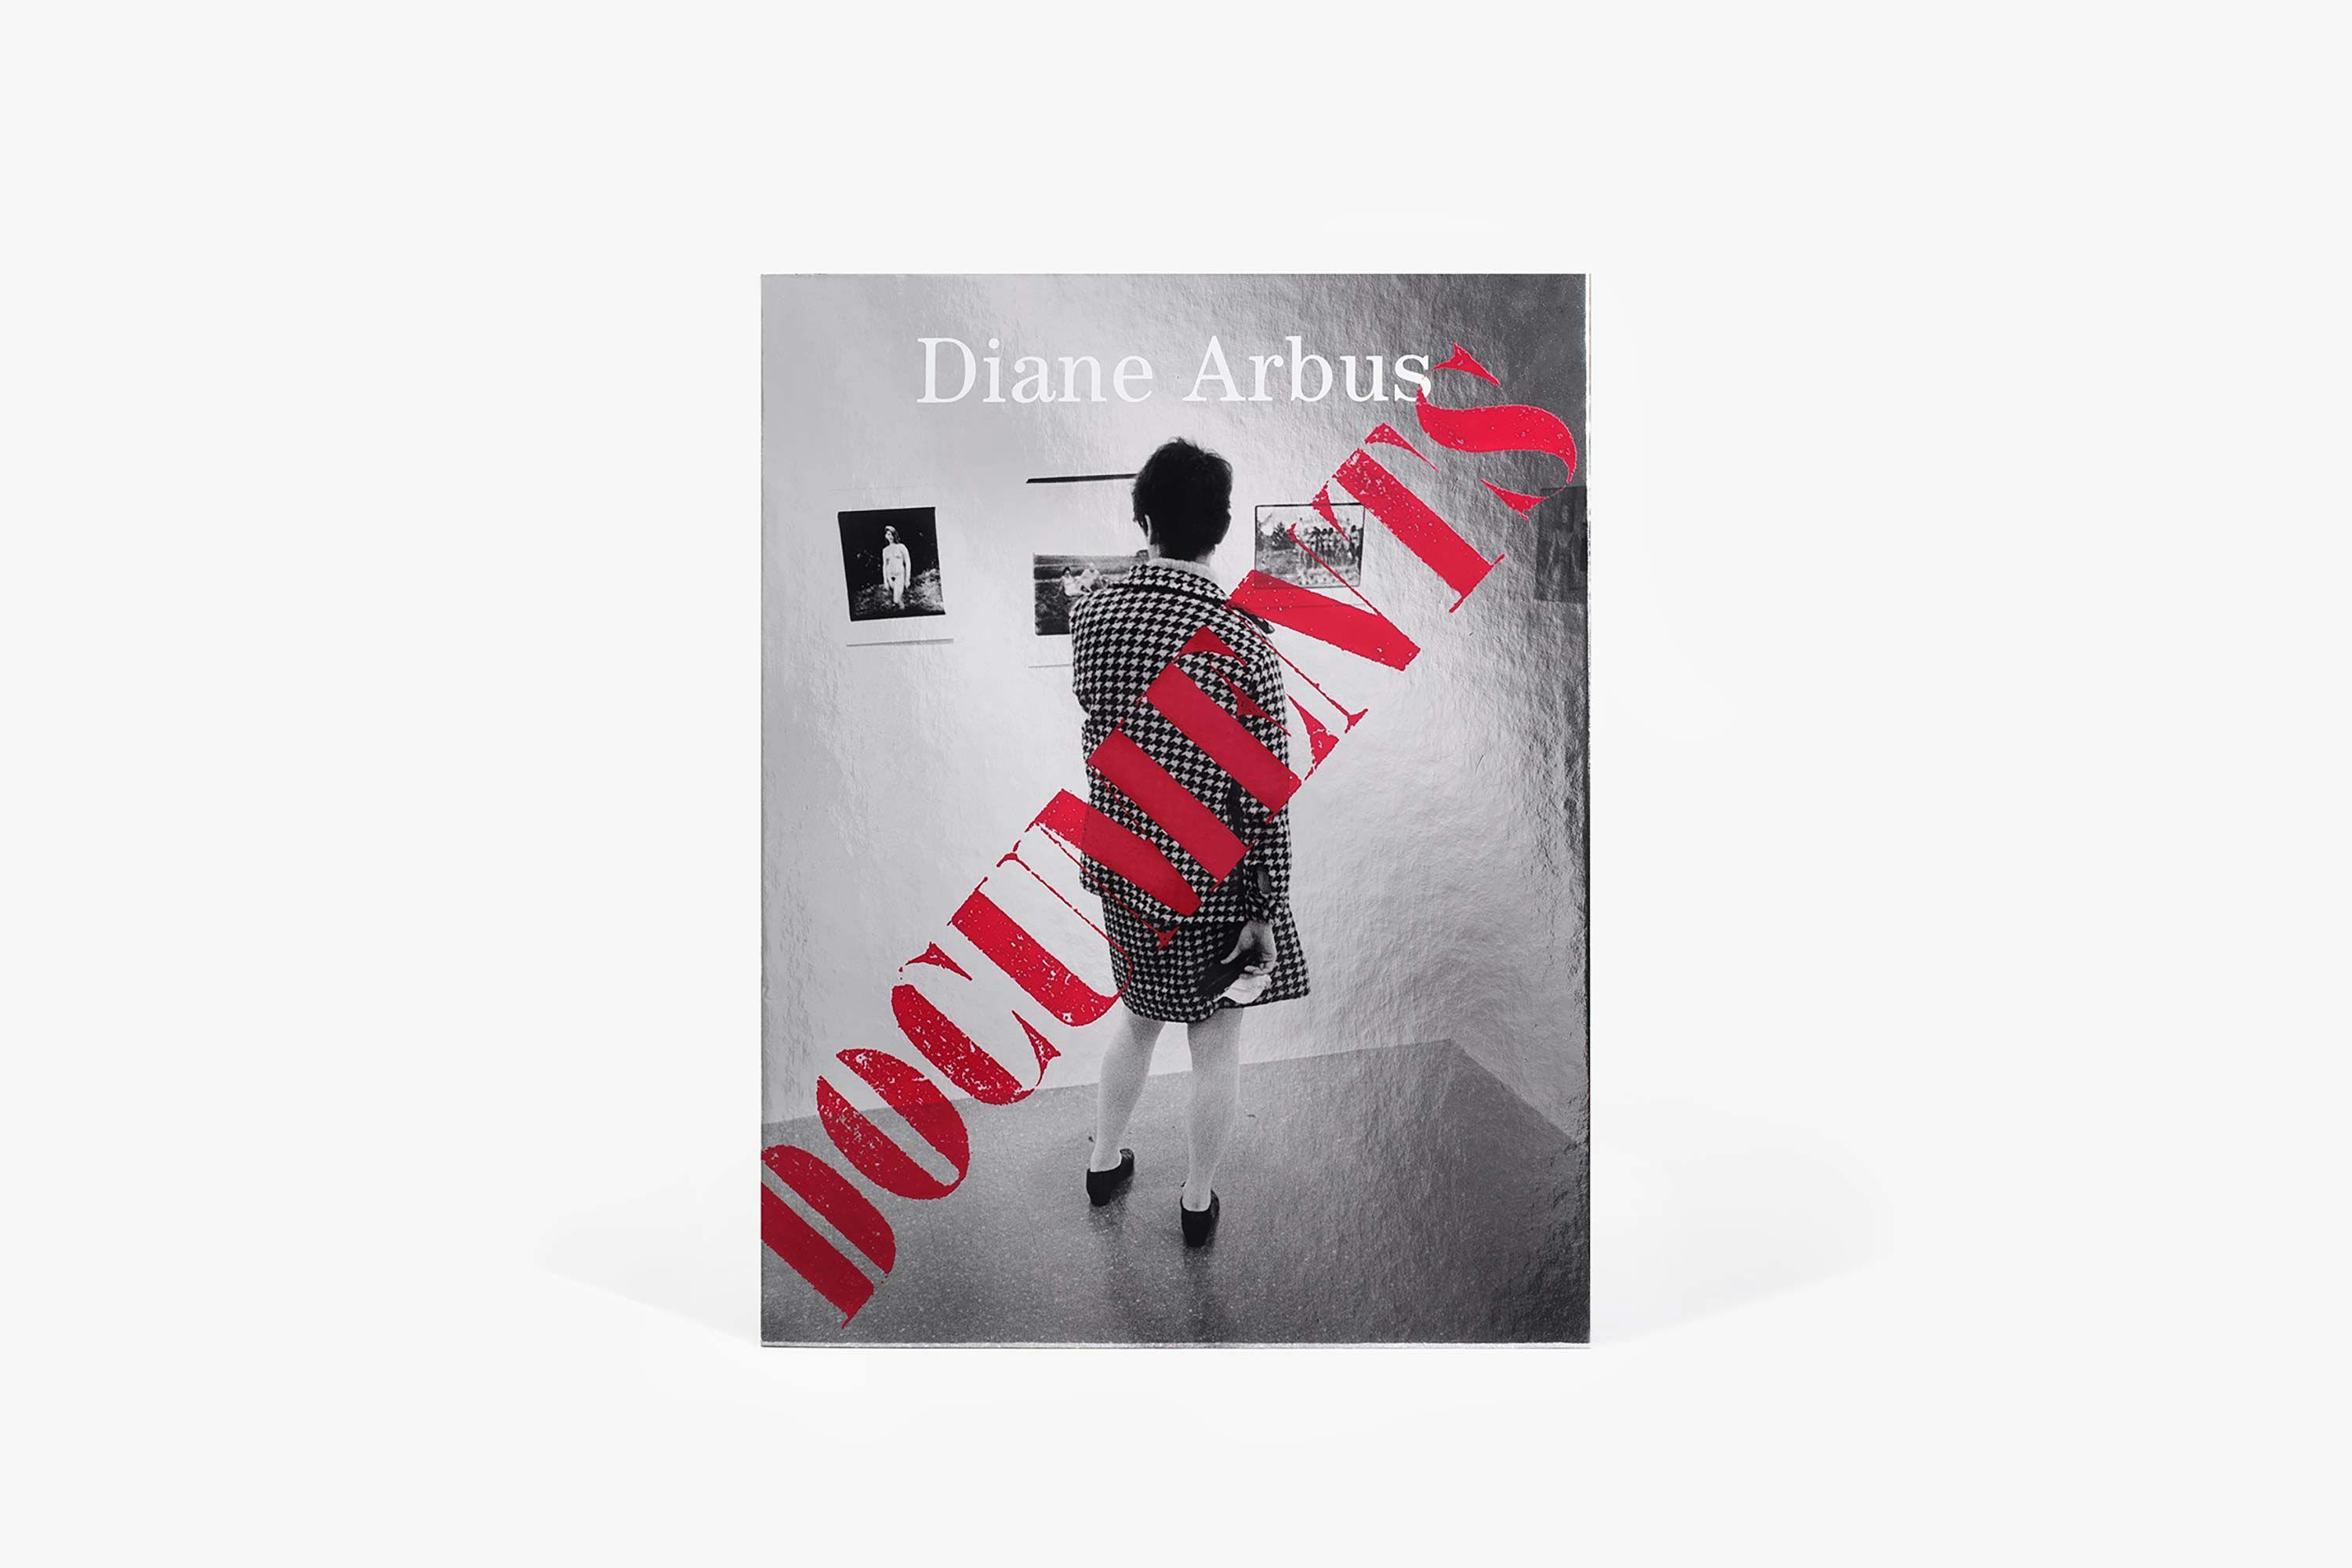 Photograph of cover of book titled  Diane Arbus Documents, published by David Zwirner Books/Fraenkel Gallery in 2022